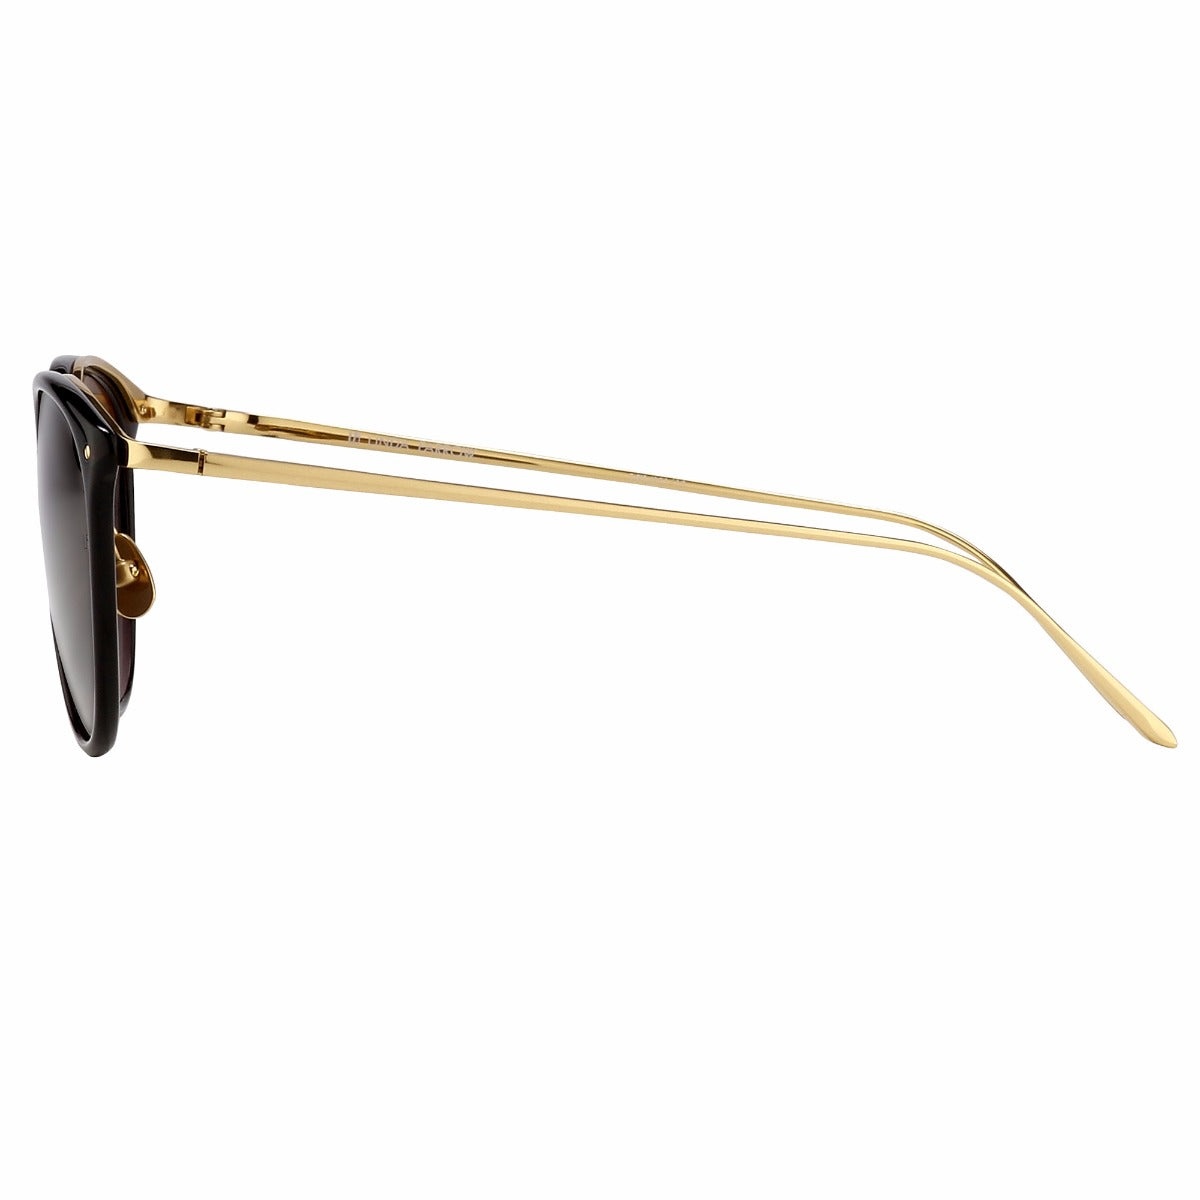 THE CALTHORPE | OVAL SUNGLASSES IN BLACK FRAME (C13) - 4